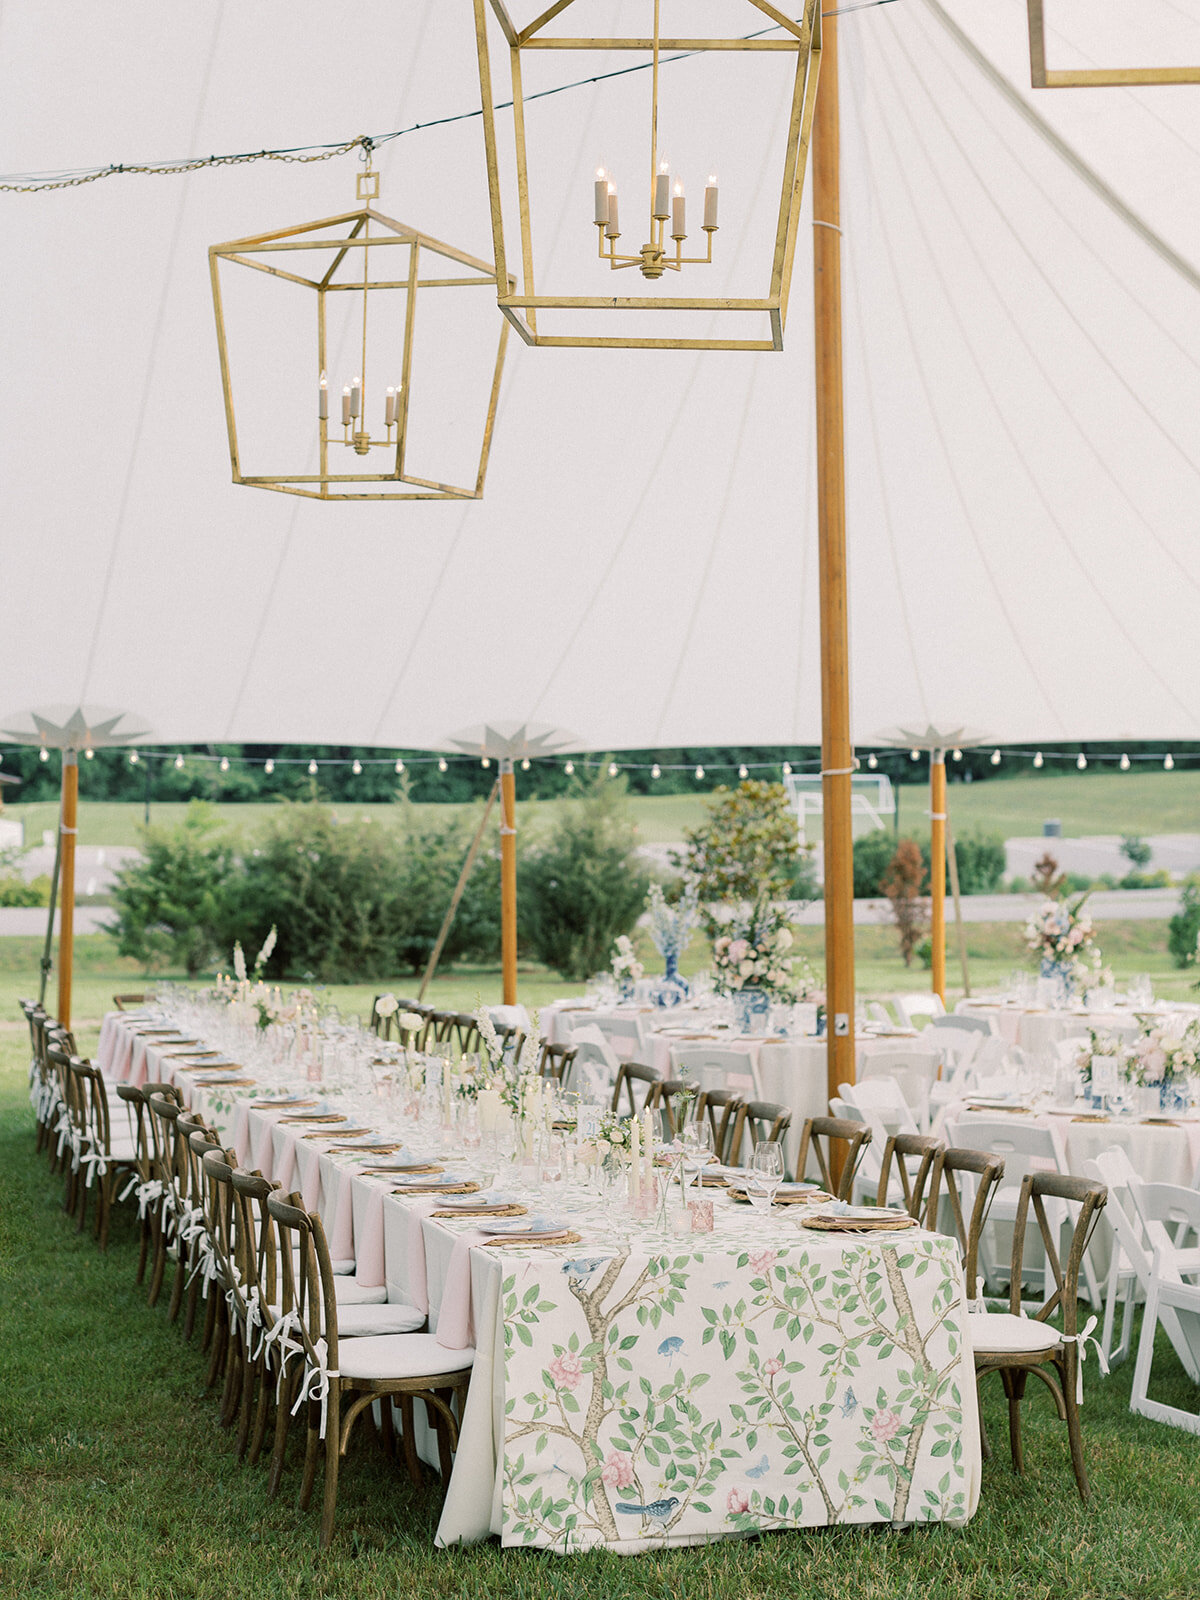 Sailcloth Tented Wedding Brentwood, TN 